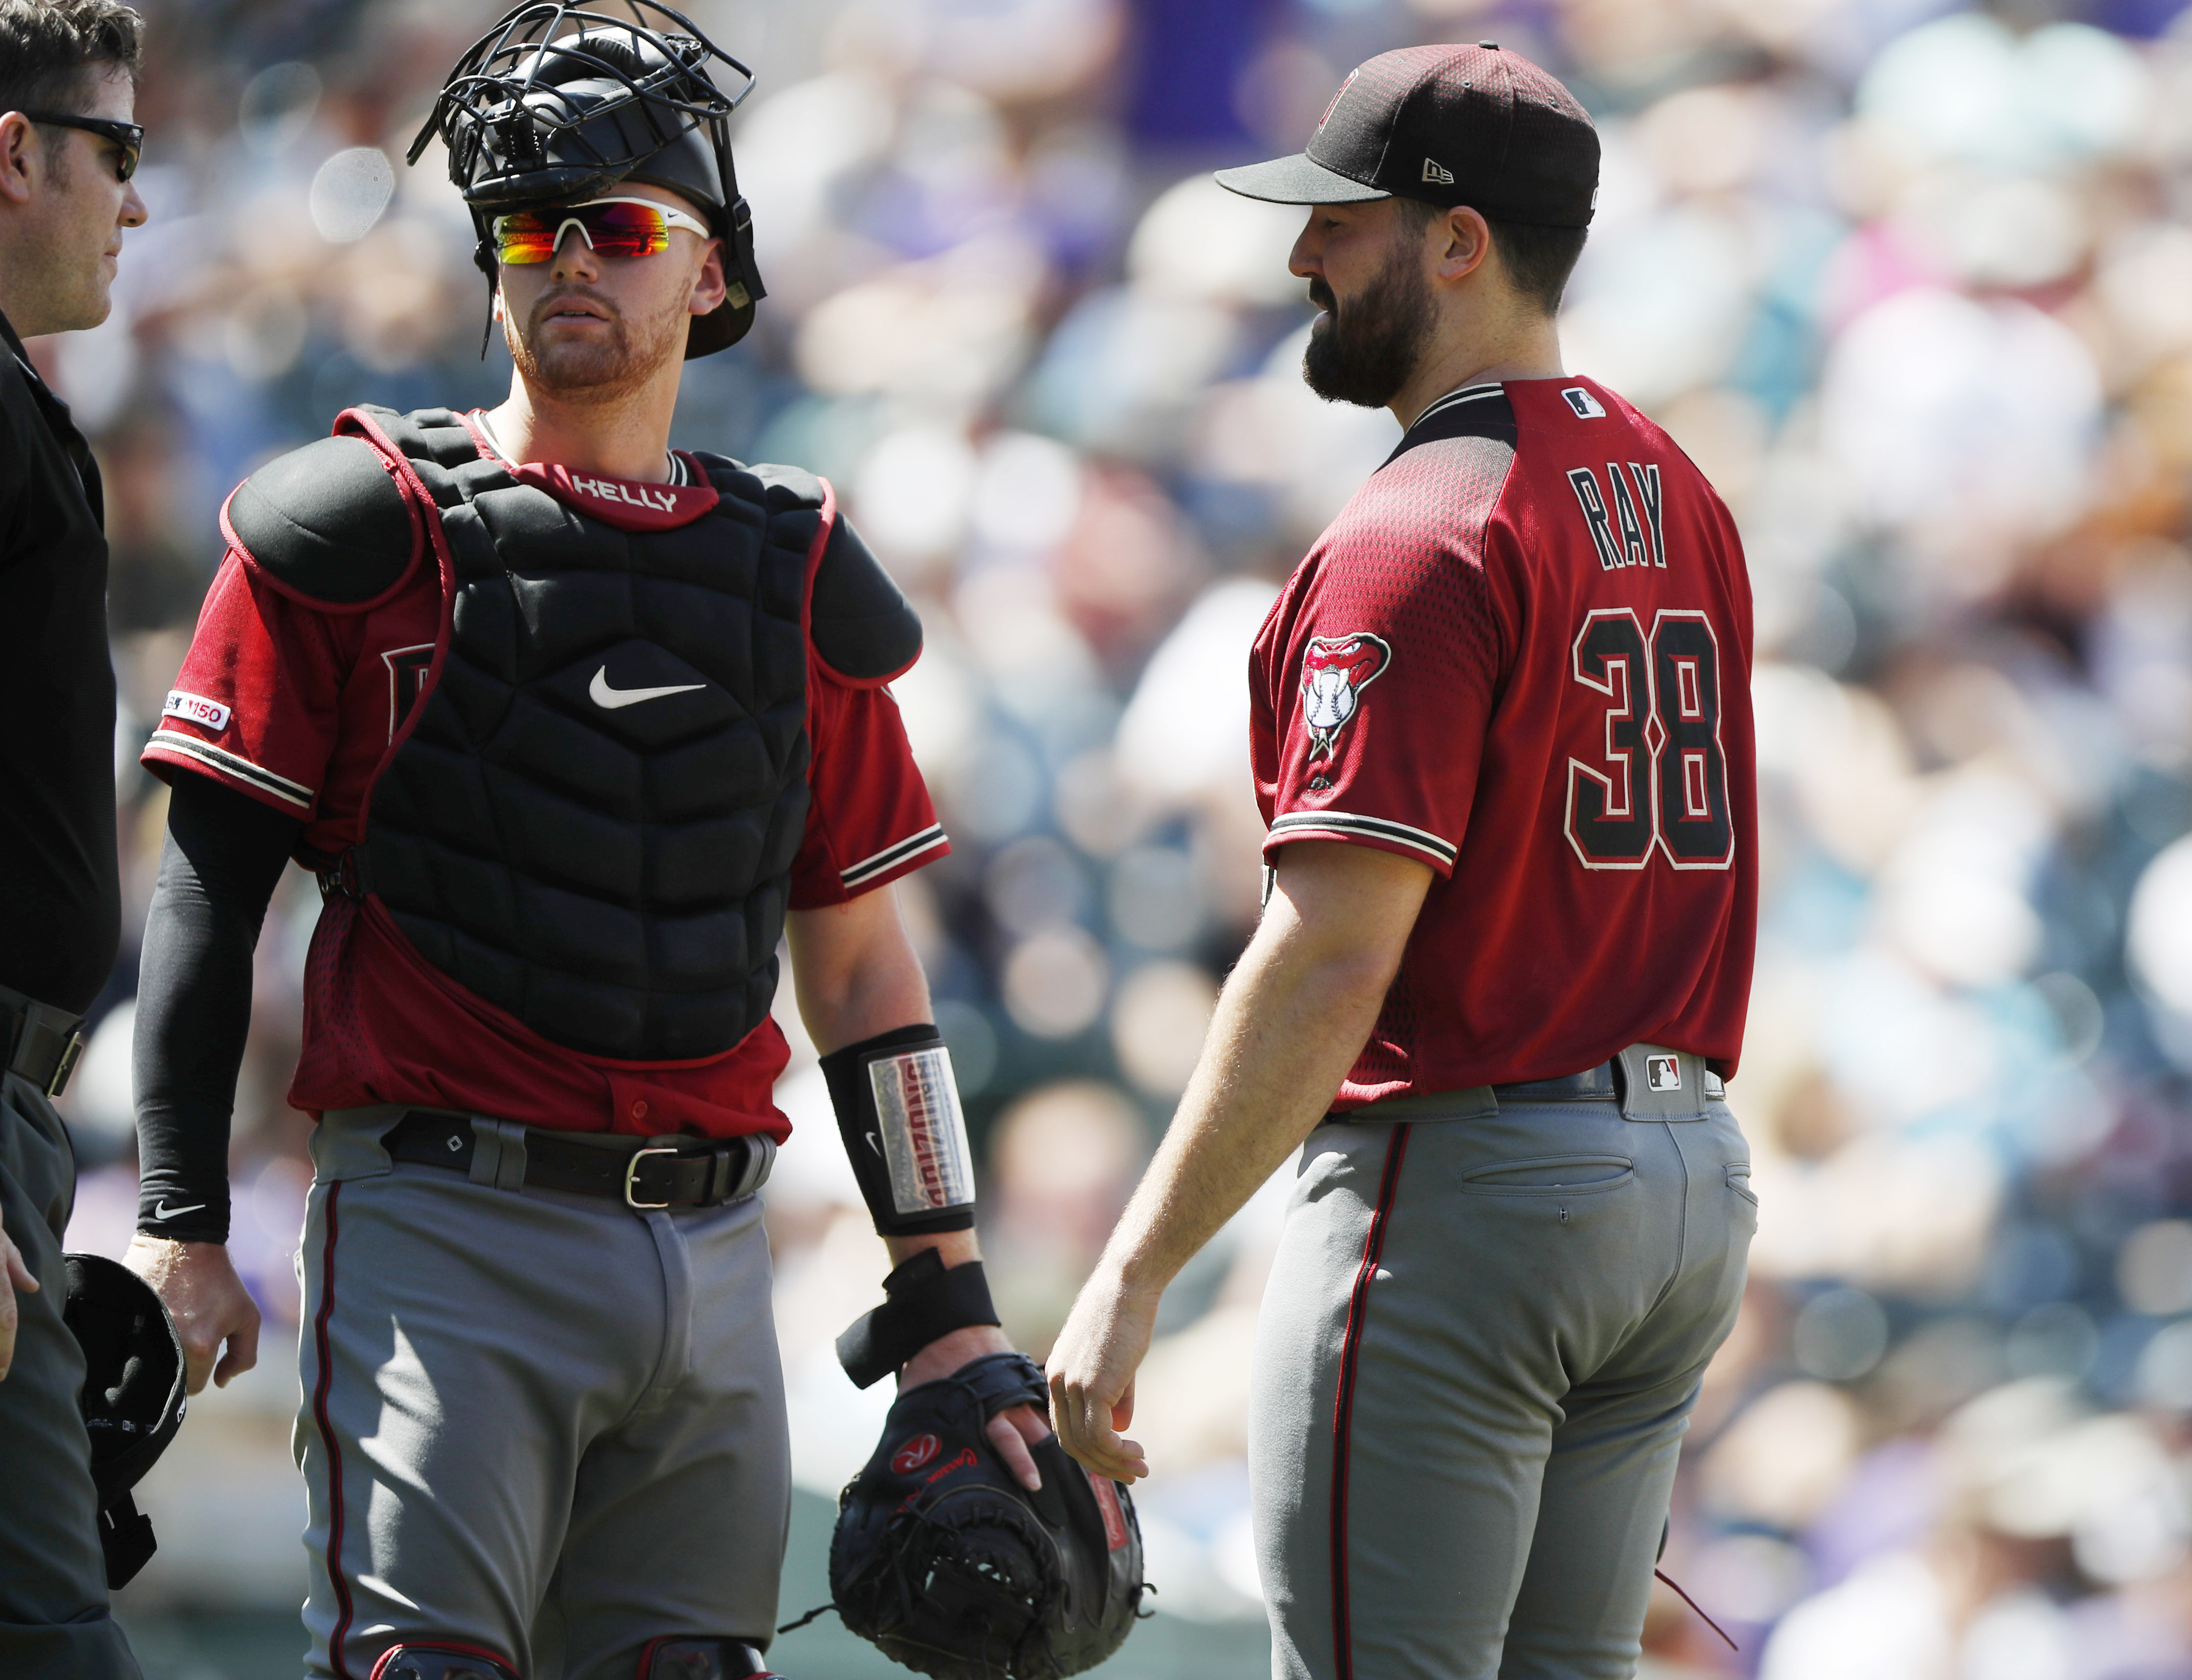 Arizona lefty Robbie Ray leaves game in 3rd with back spasms